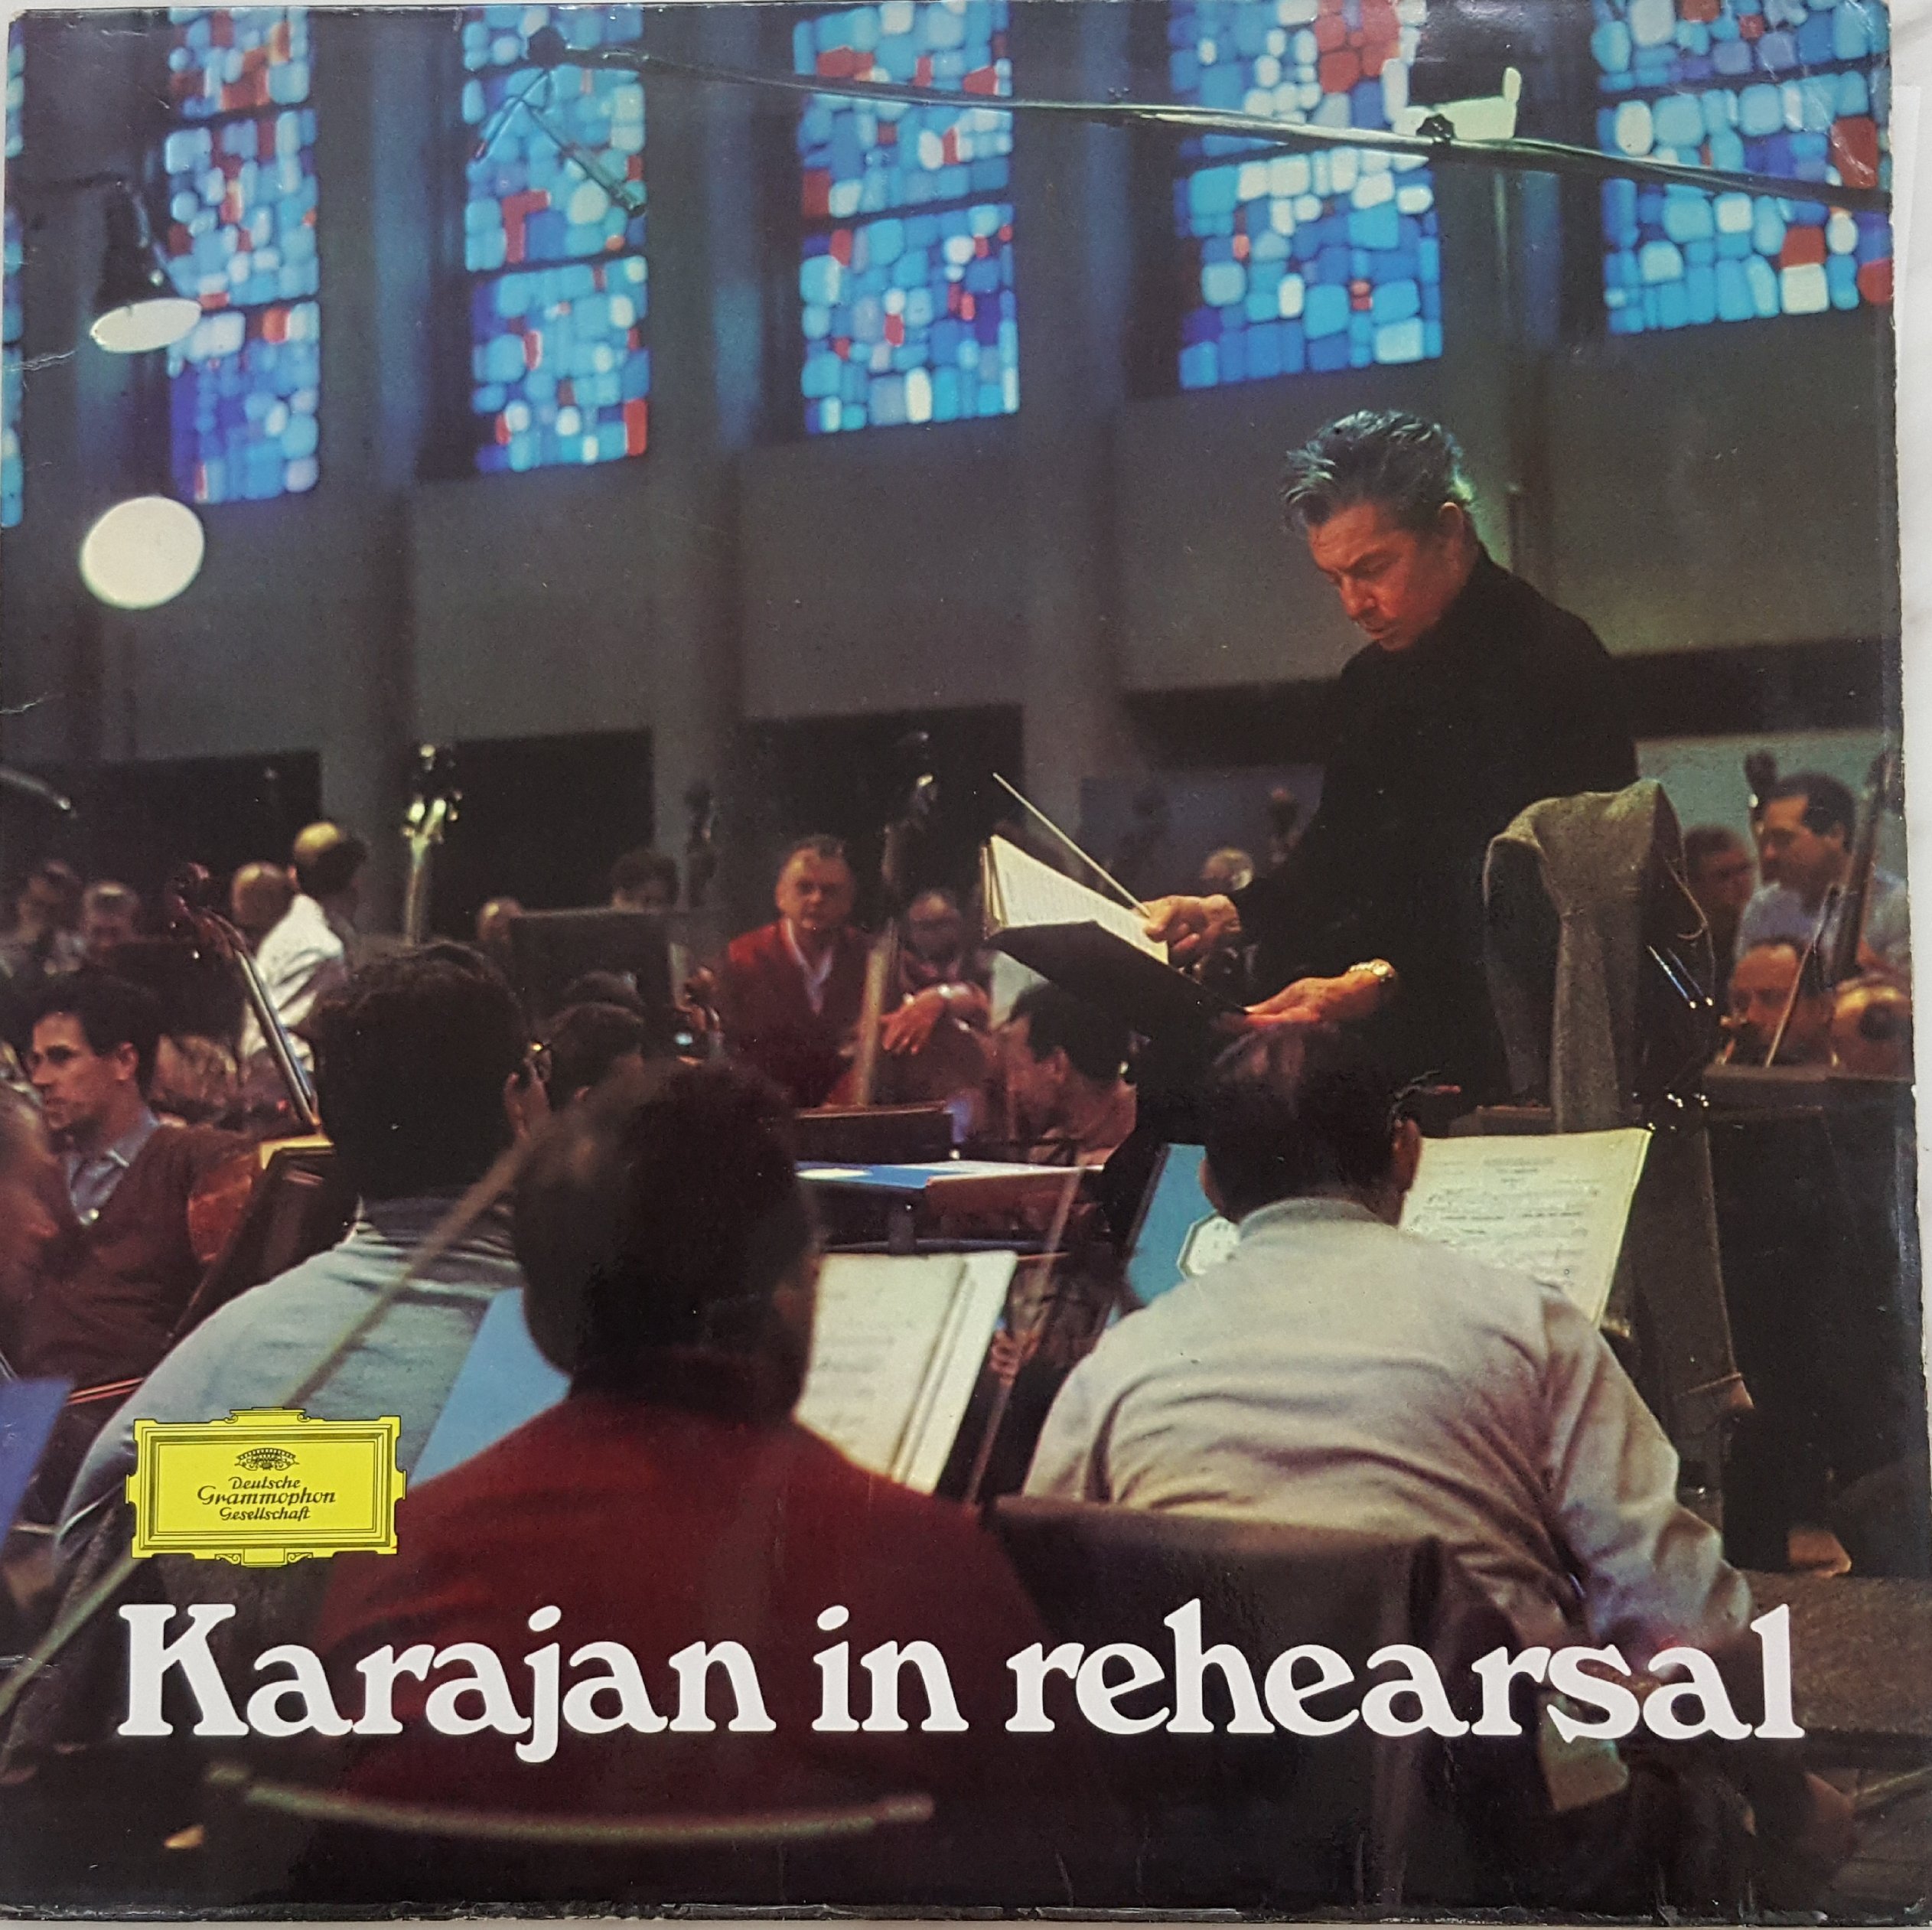 KARAJAN in rehearsal uk dgg with catalogue and dgg crossword